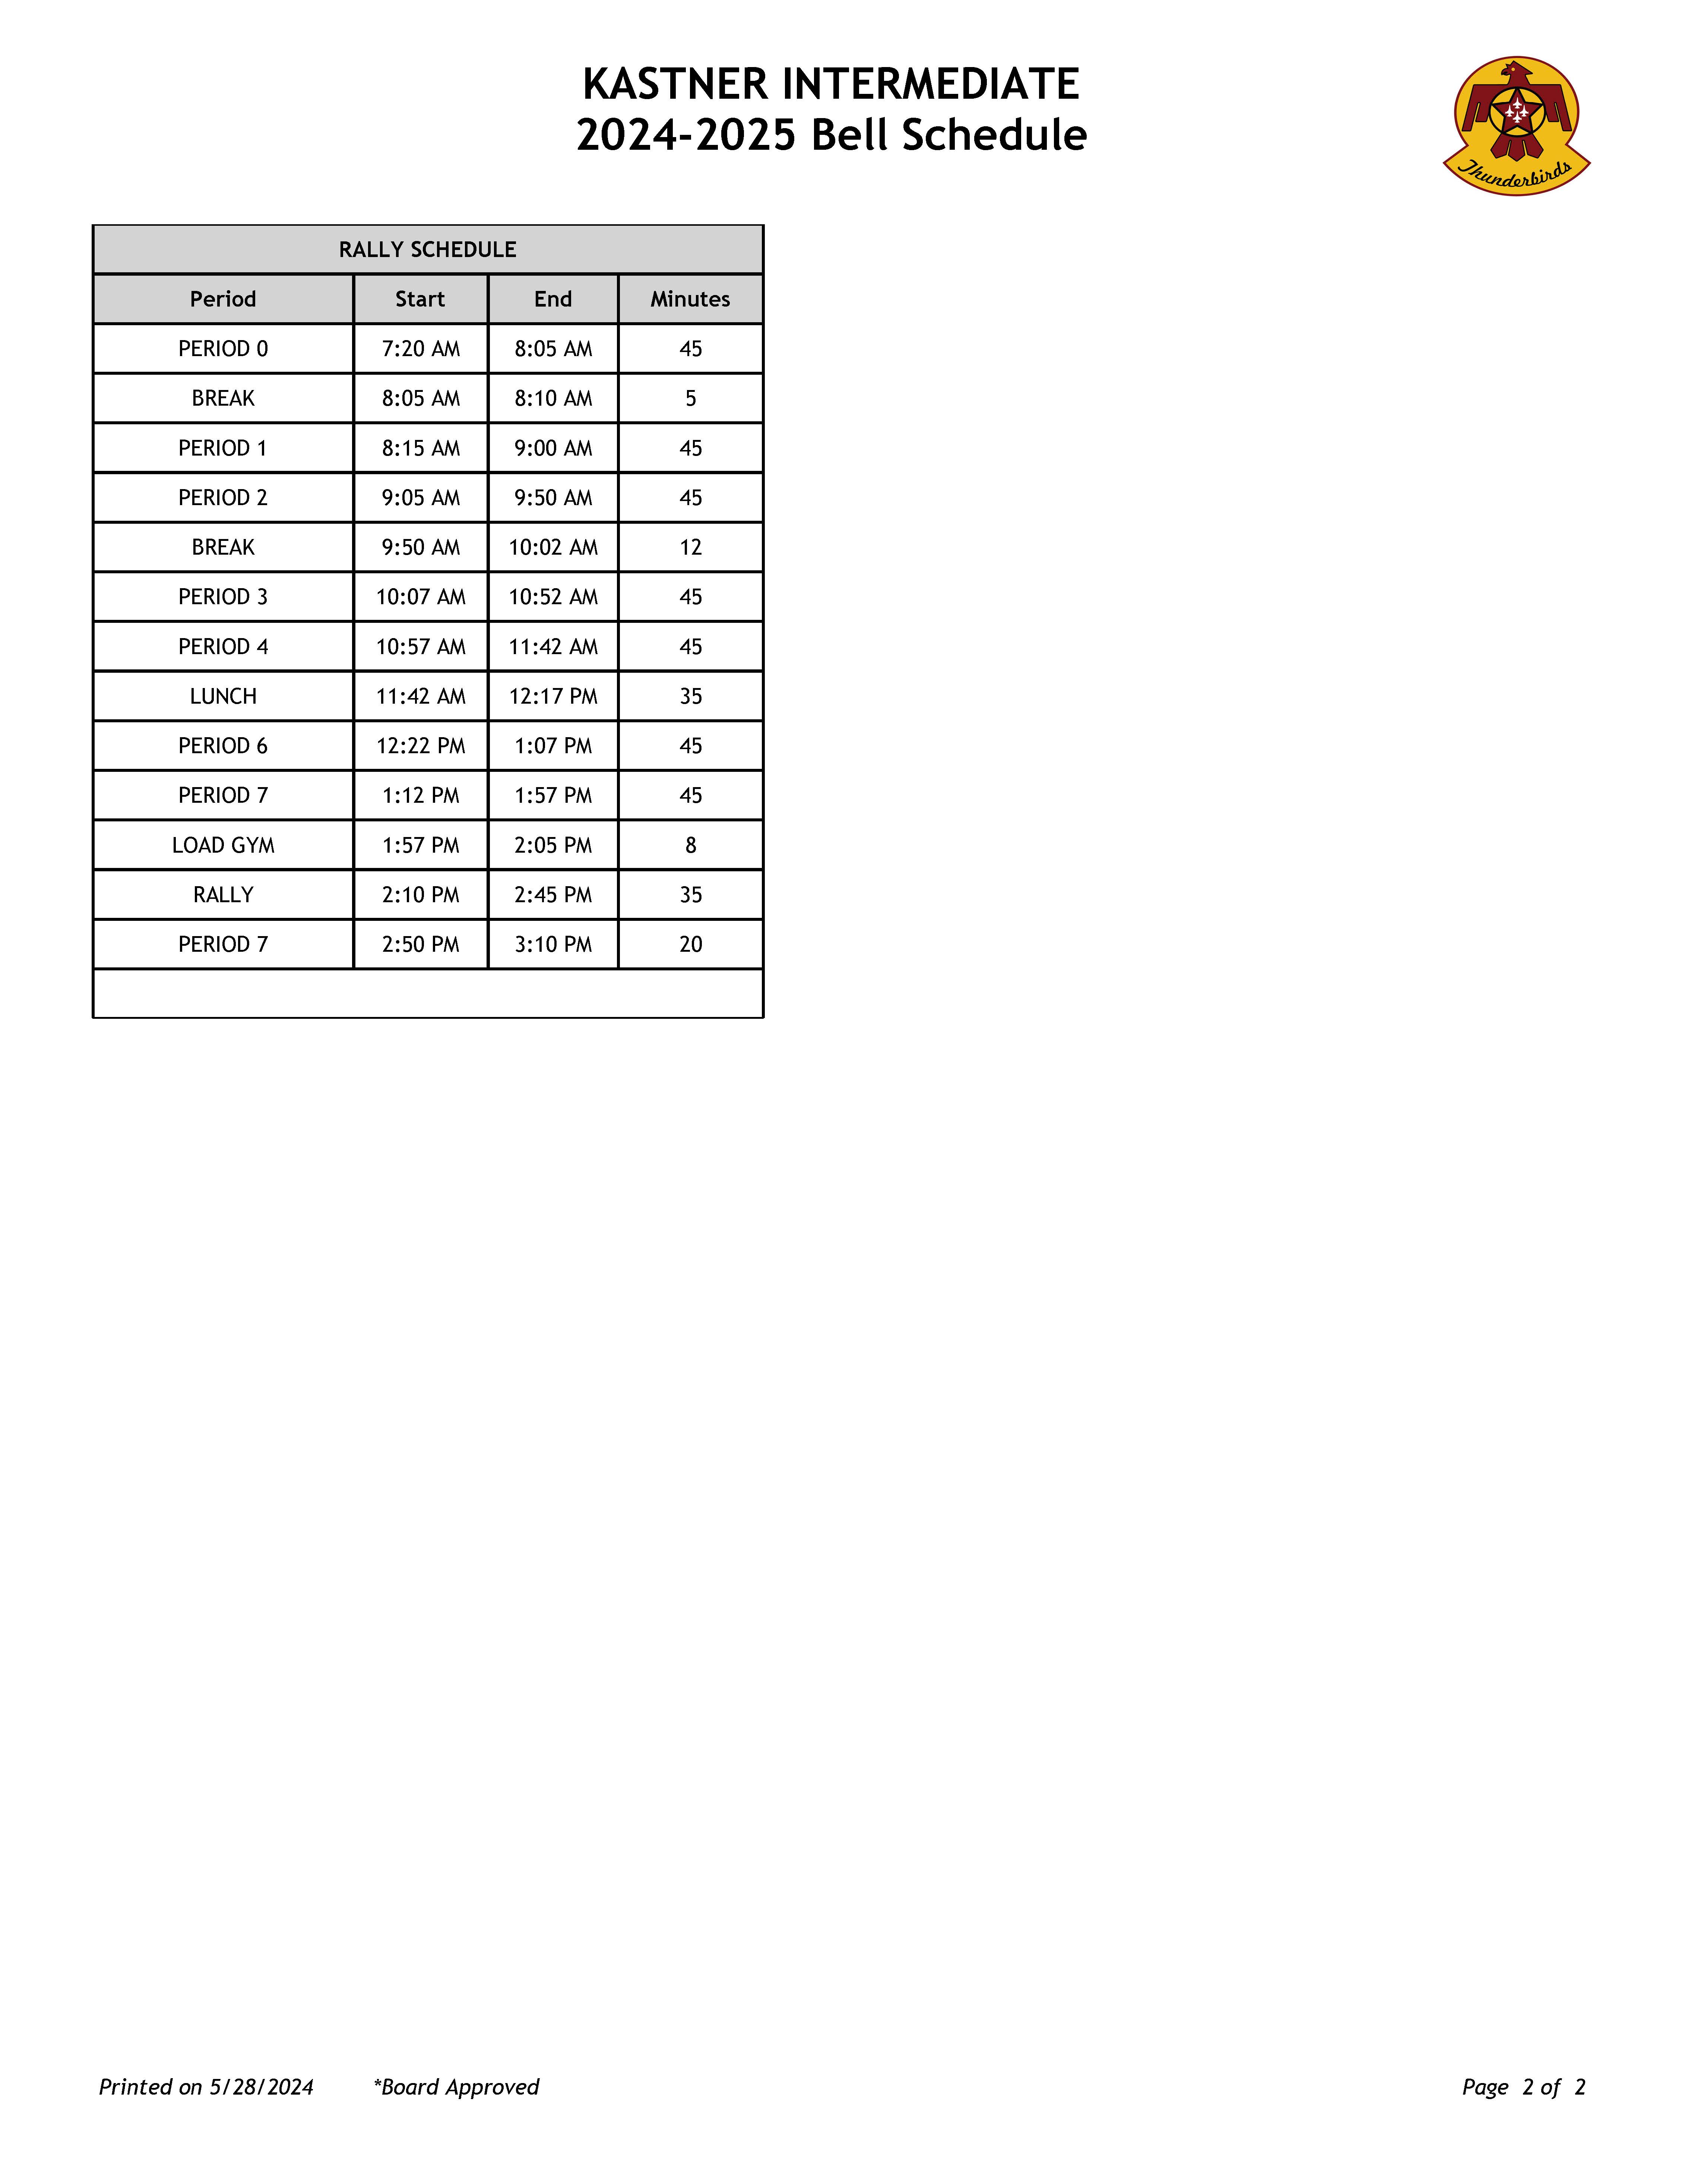 24-25 rally bell schedule